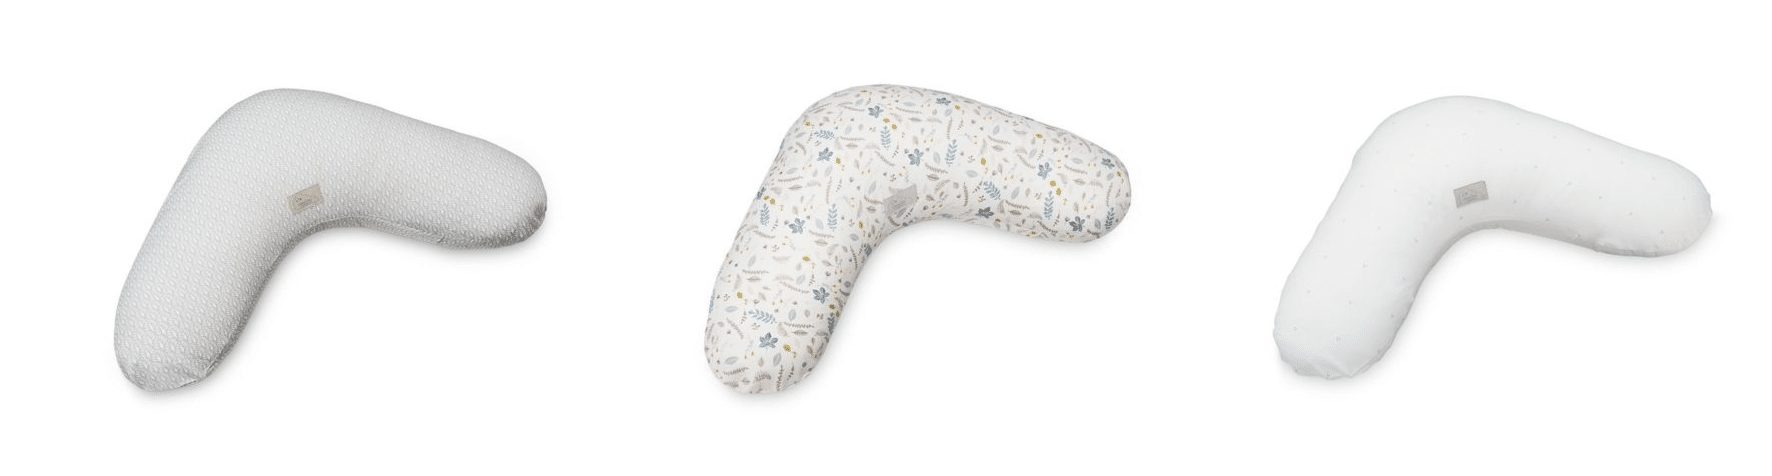 Nursing pillow covers for Fossflakes breastfeeding pillow